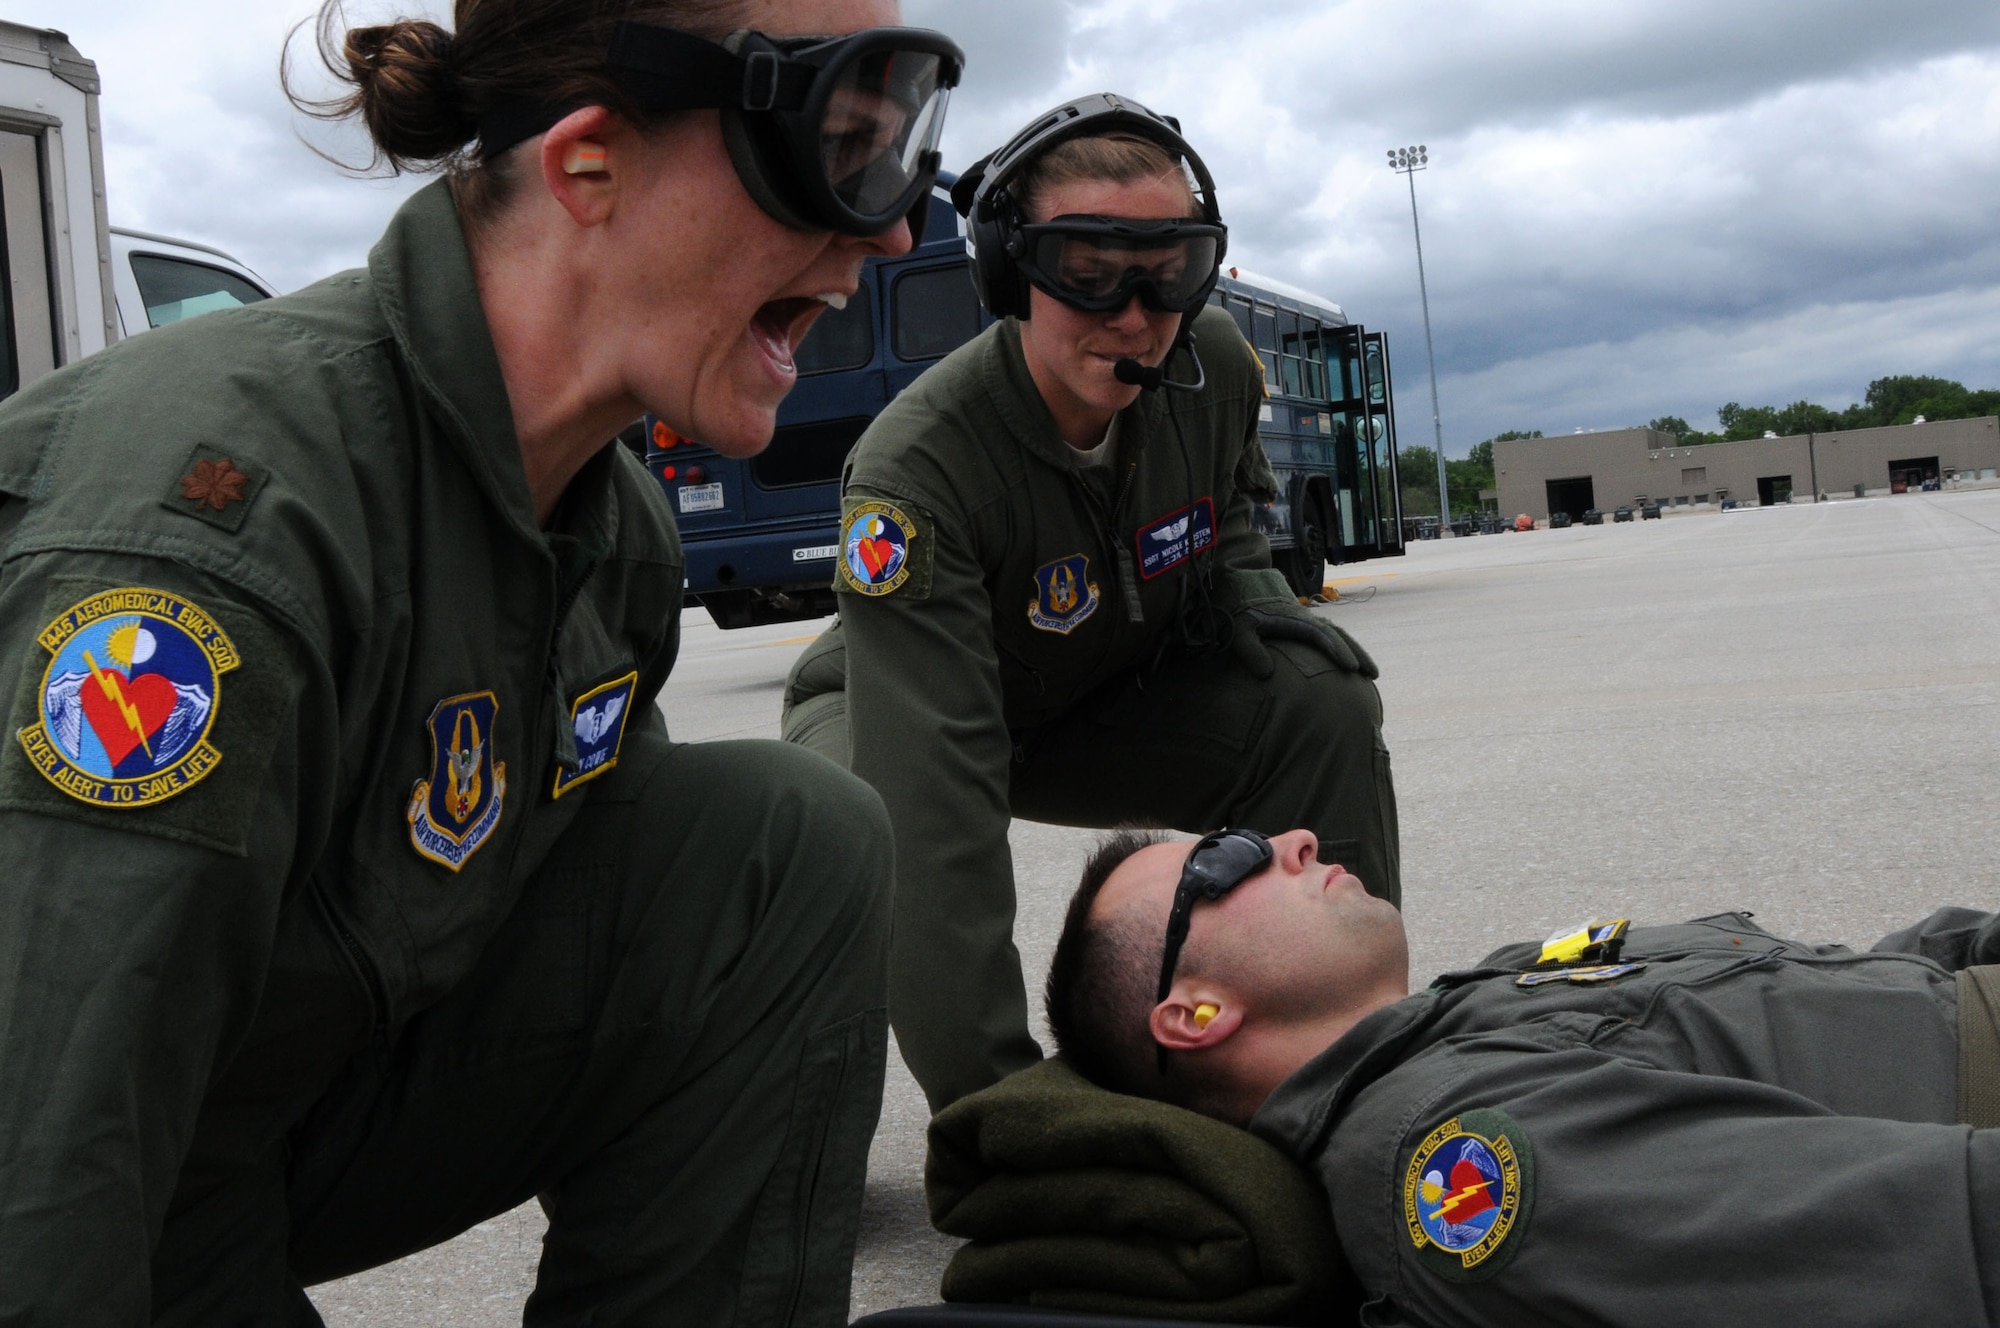 445th Aeromedical Evacuation Squadron crew members, Maj. Jen Cowie (left) and Staff Sgt. Nicole Karsten (right), prepare to lift a Citizen Airman simulating a patient for a joint training mission here, June 7, 2017. The 445th AES trained for two hours while airborne to simulate a real-world scenario. (U.S. Air Force photo/Senior Airman Joshua Kincaid)